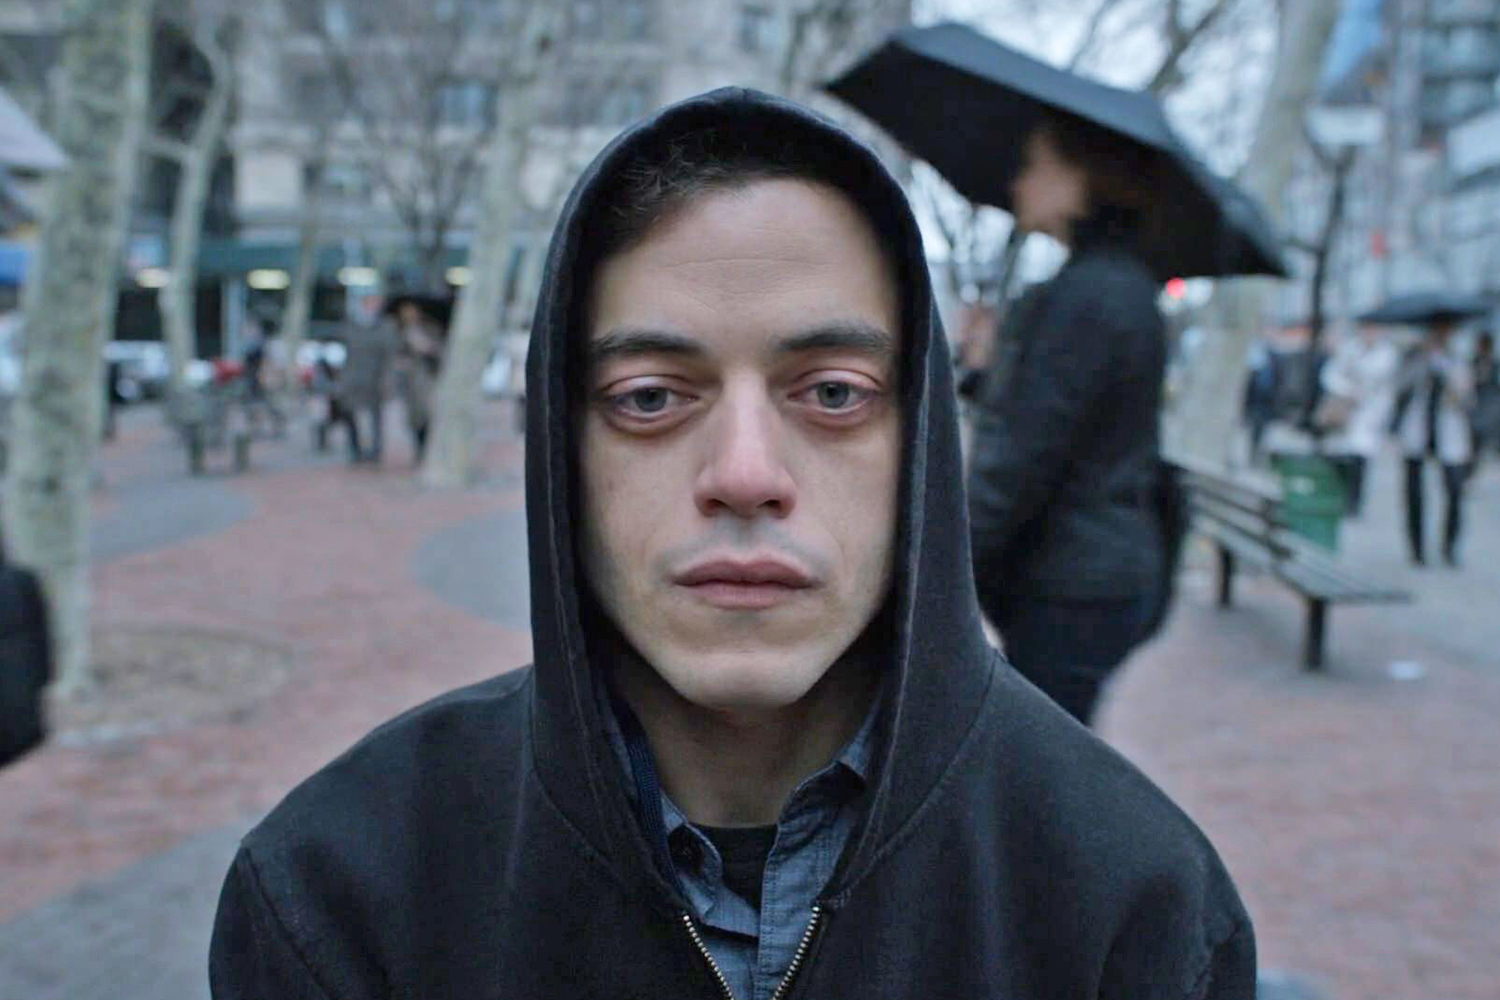 How To Stream 'Mr. Robot' Online So You Don't Miss 1 Action-Packed Second